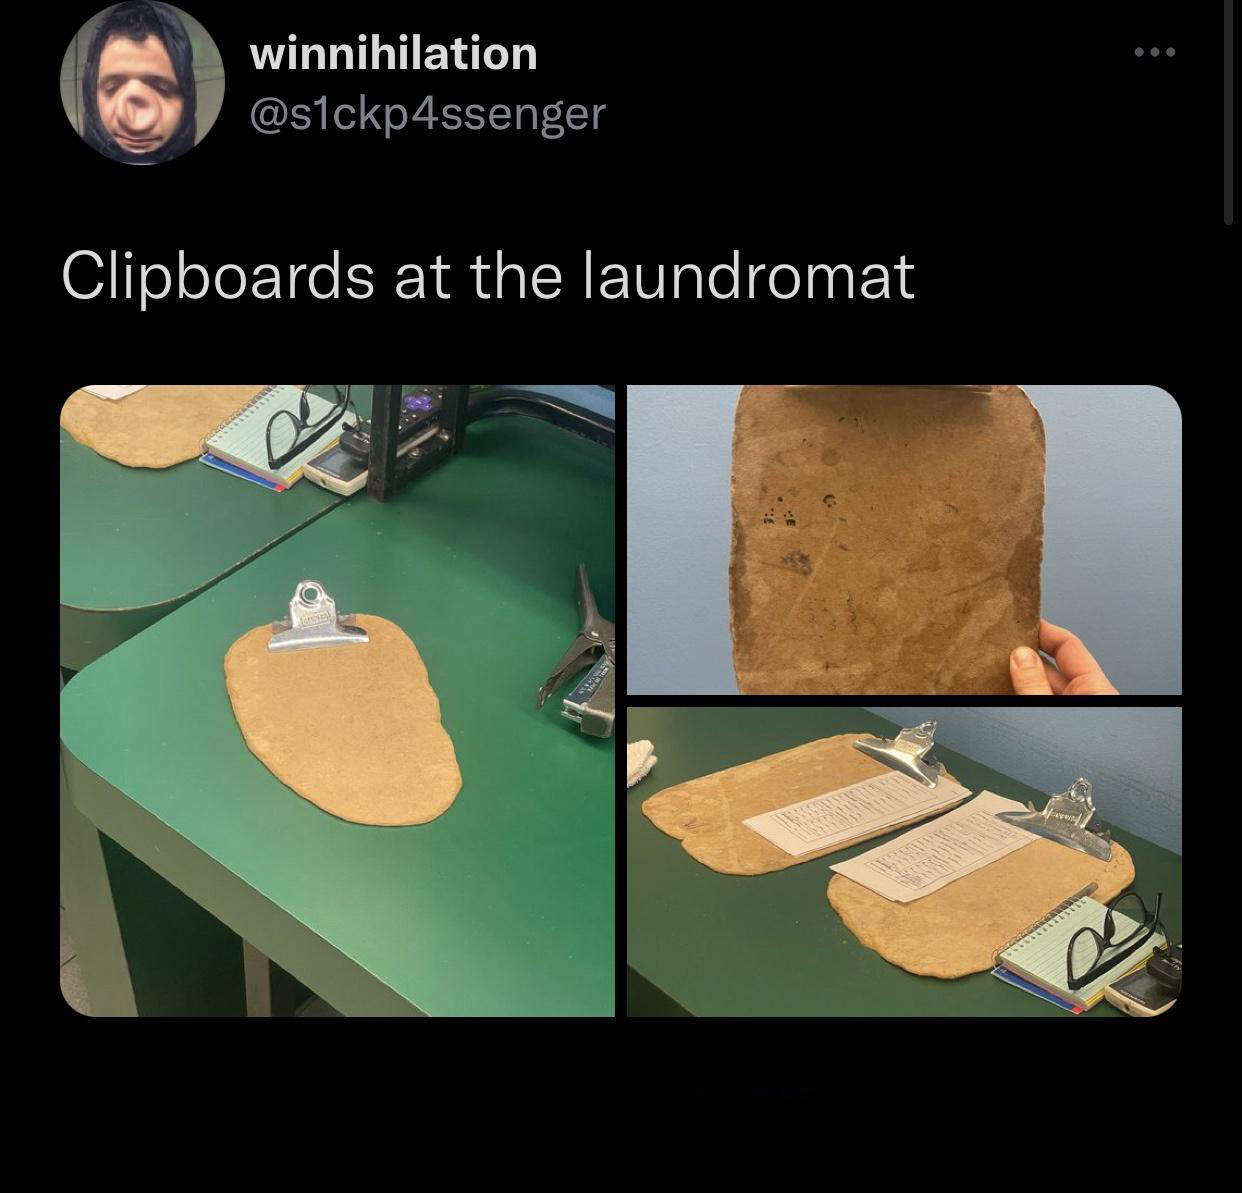 new memes - material - winnihilation Clipboards at the laundromat Sever